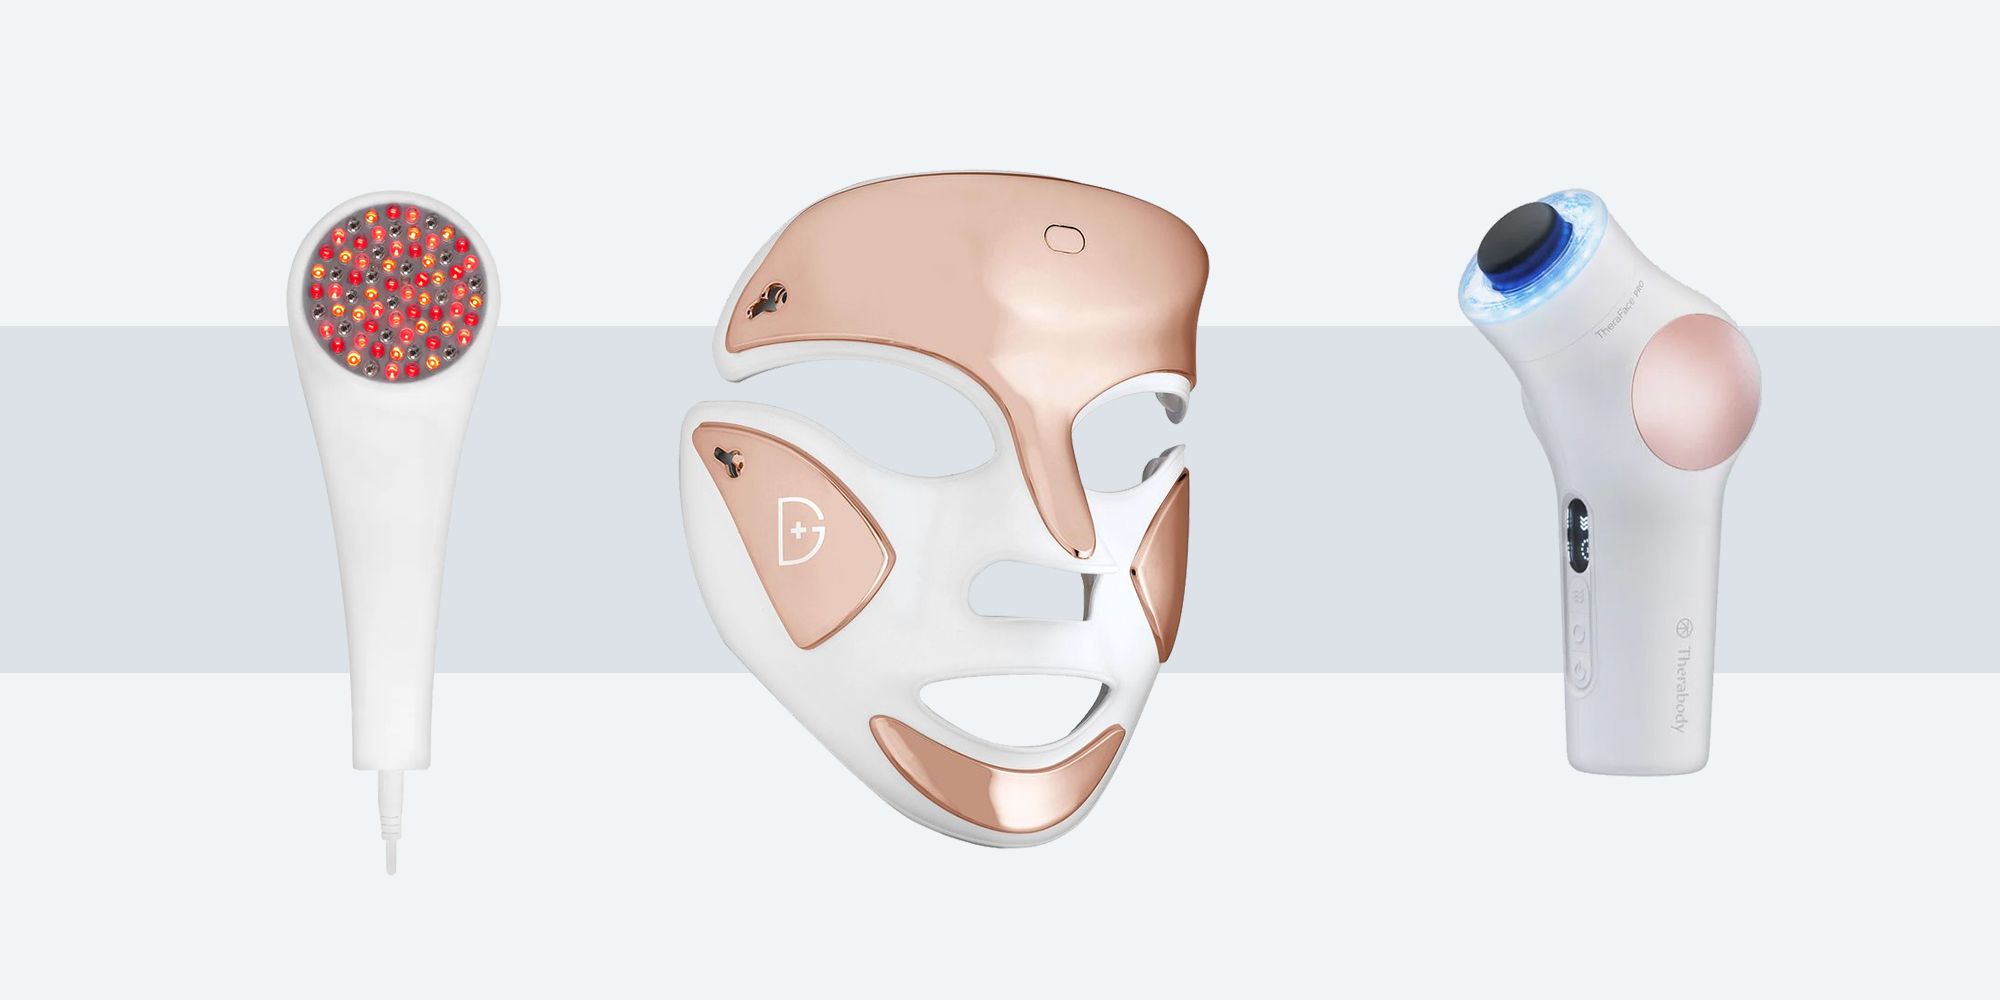 10 Best At-Home Light Therapy Devices of 2022 - Dermatologist-Recommended LED Masks